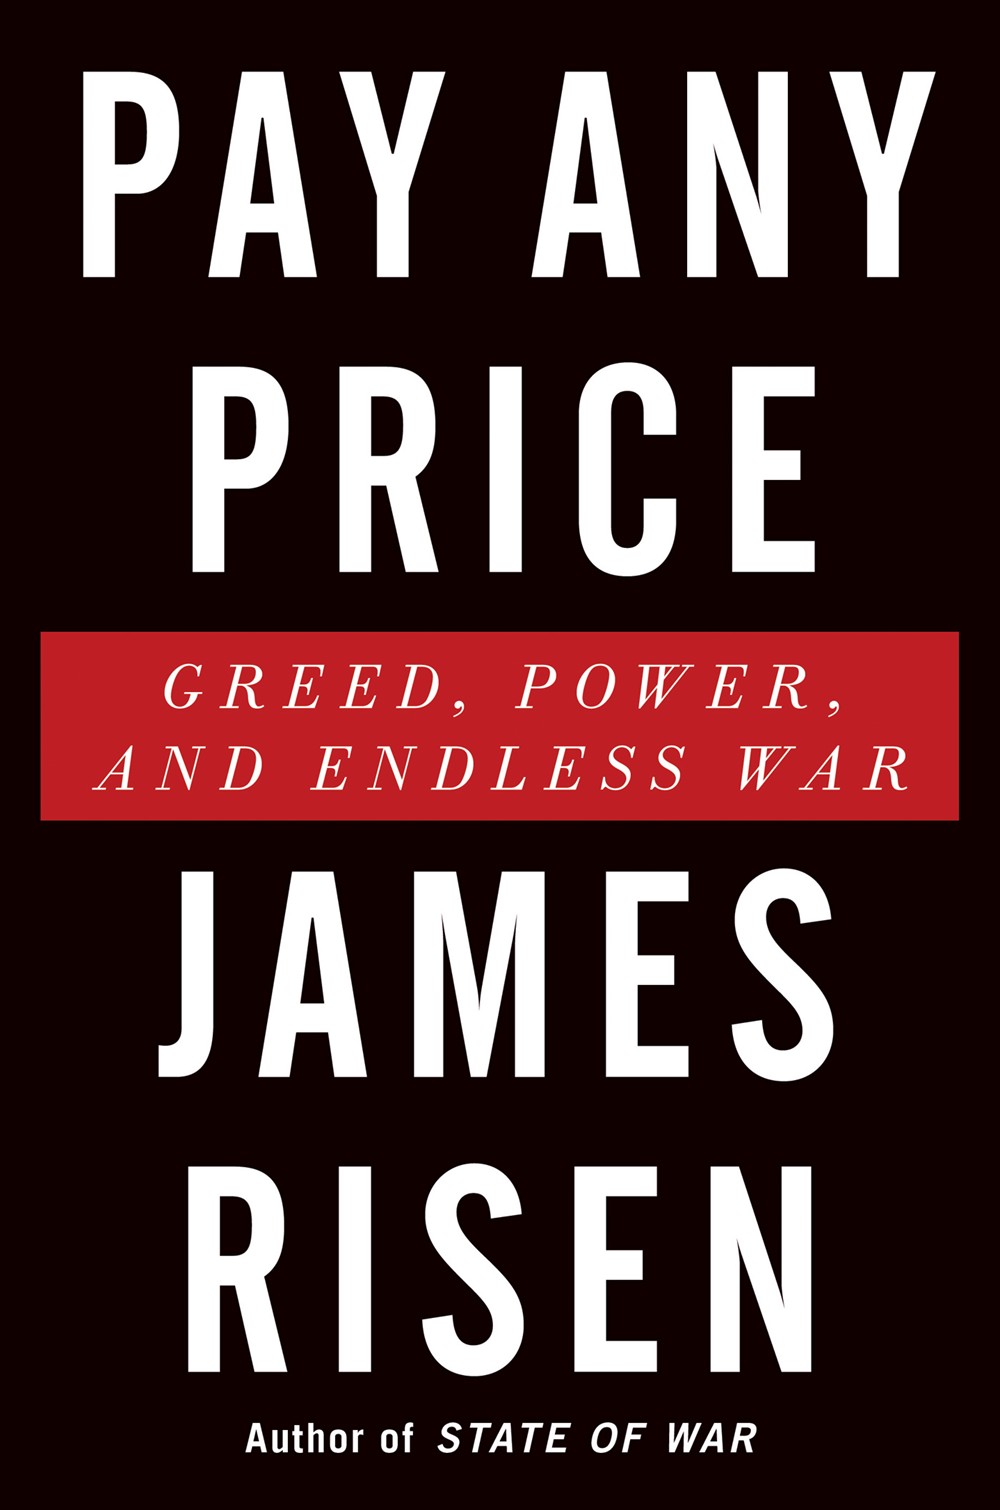 Pay Any Price: Greed, Power, and Endless War